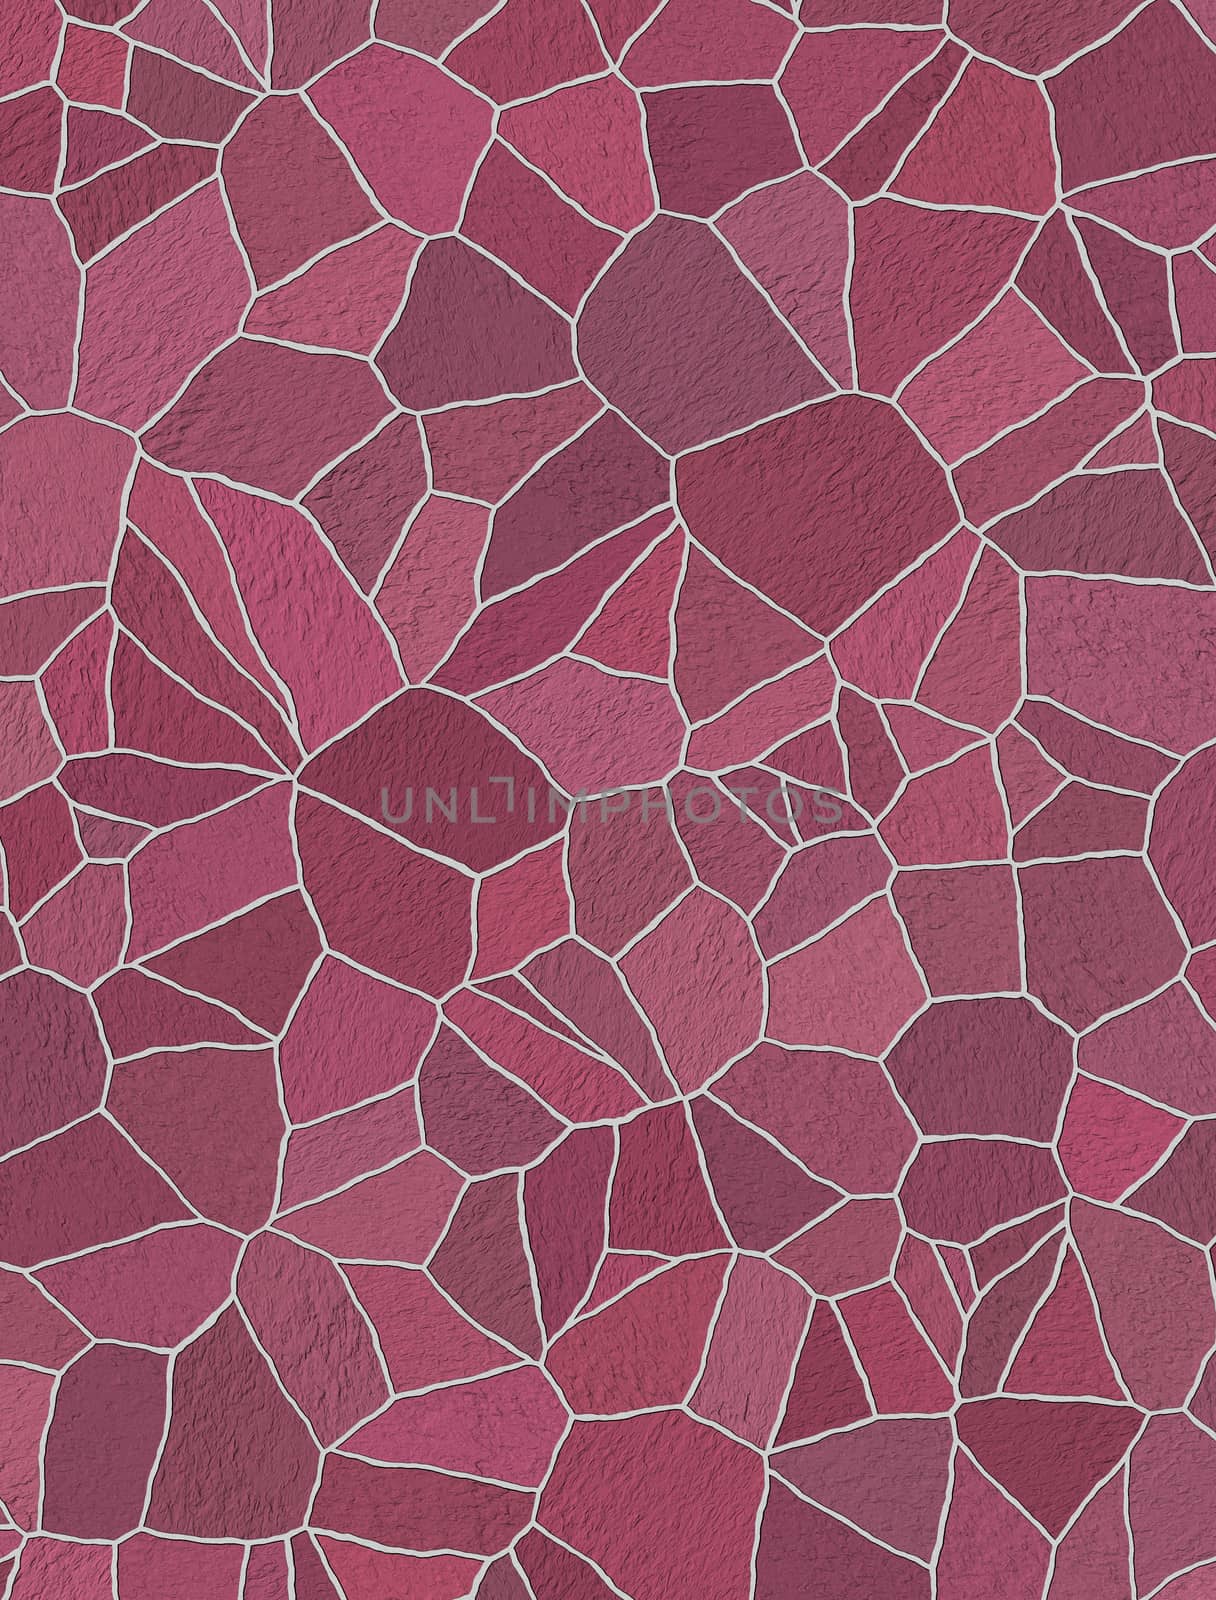 Pink stone tile seamless background